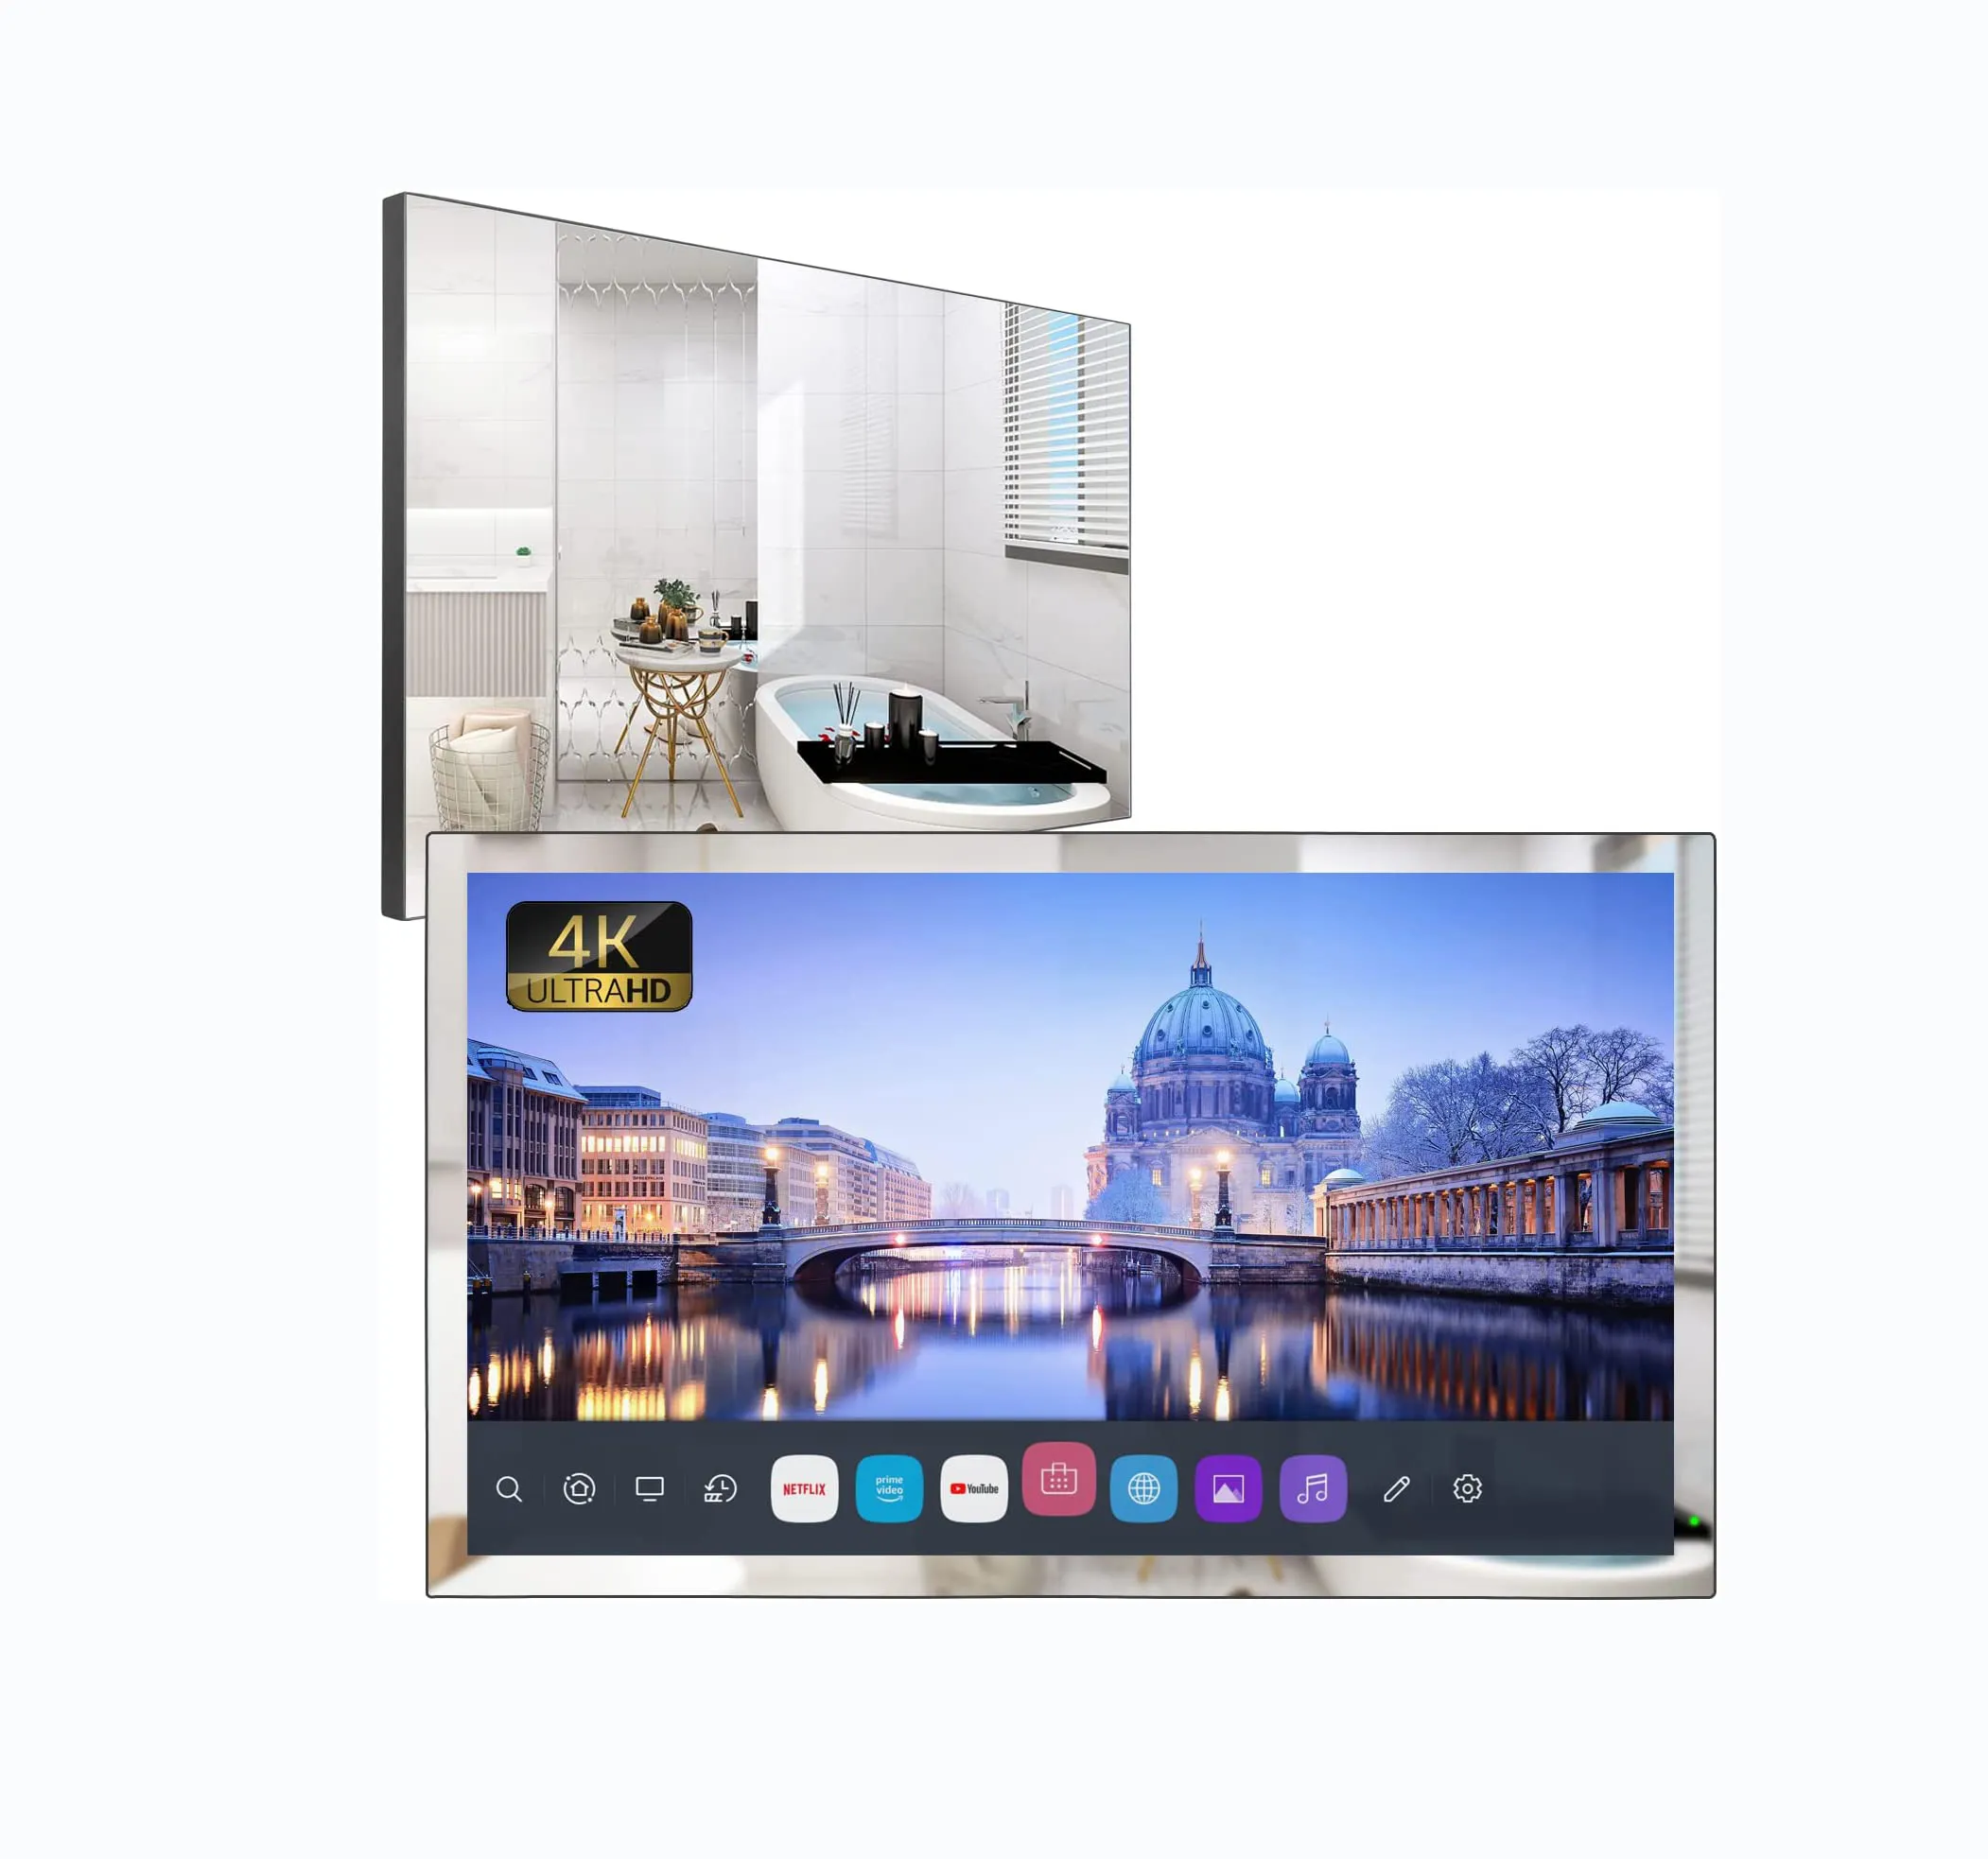 Free Shipping 32 inches LED 4K IP65 Rate Waterproof Bathroom Mirror TV webOS System Voice Control